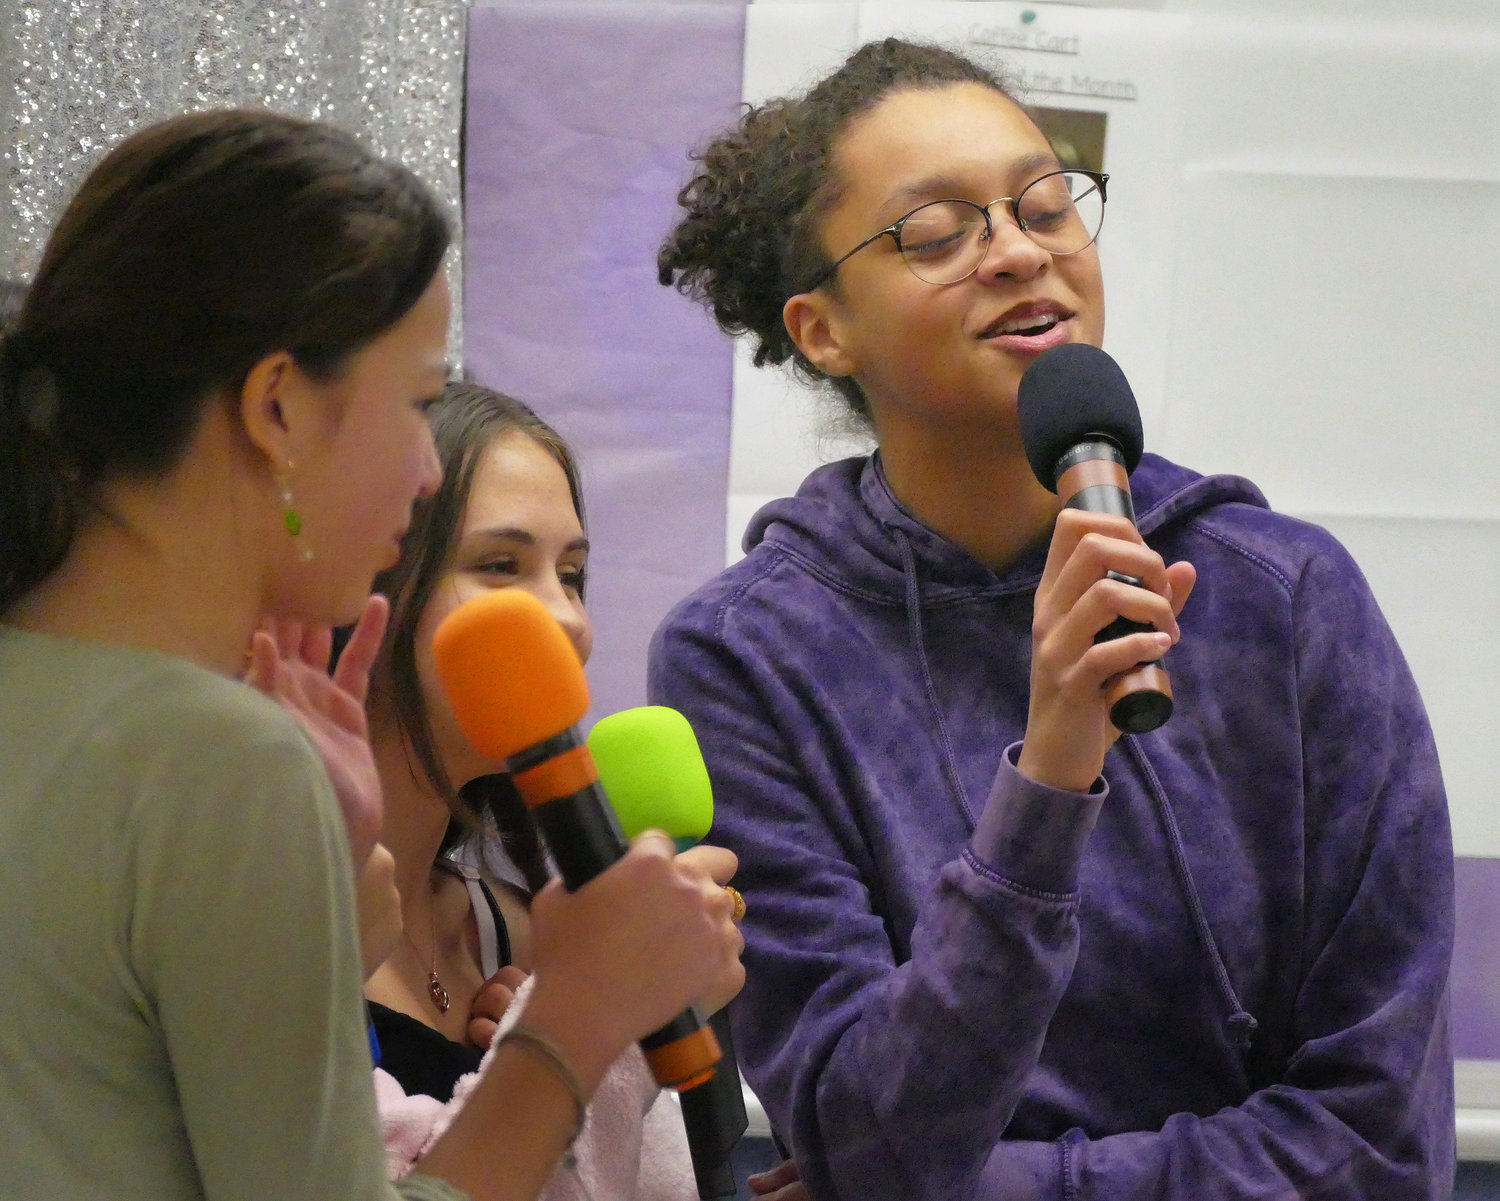 Some students sang karaoke in front of their fellow classmates.